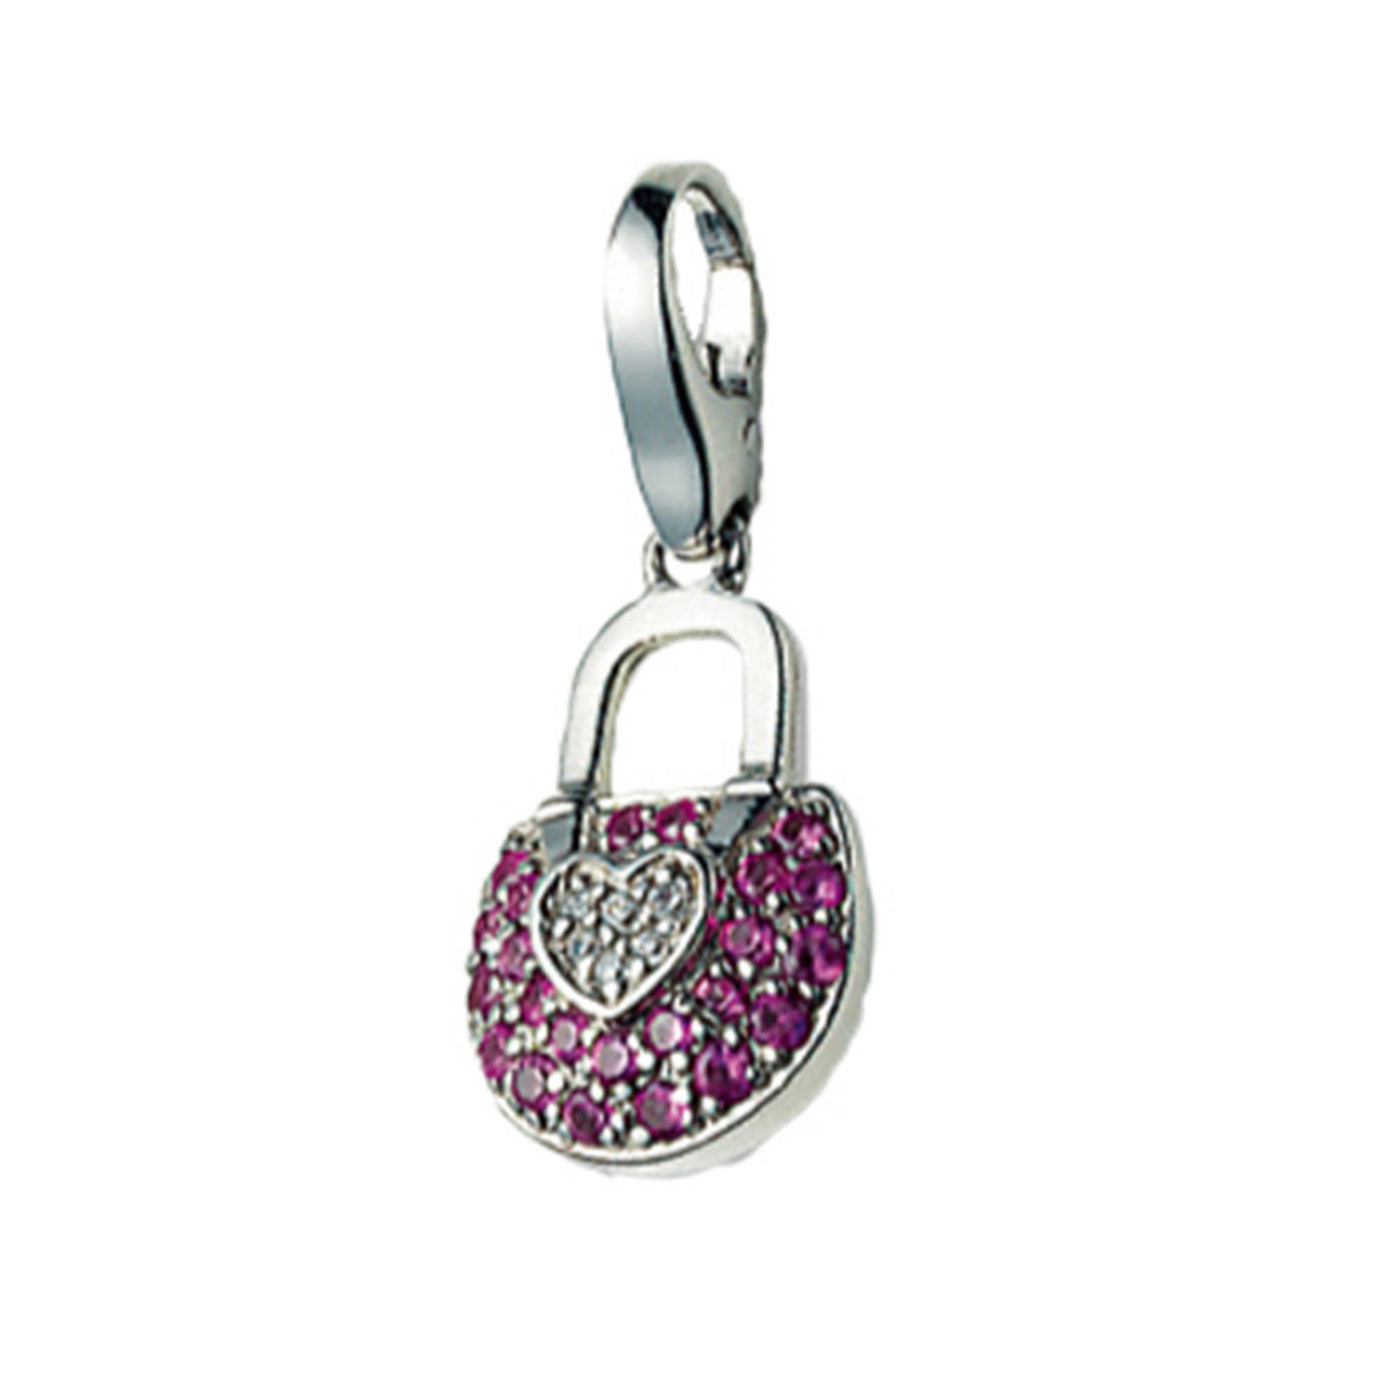 Rebecca Sloane Sterling Silver Pocketbook With Pink CZ Charm